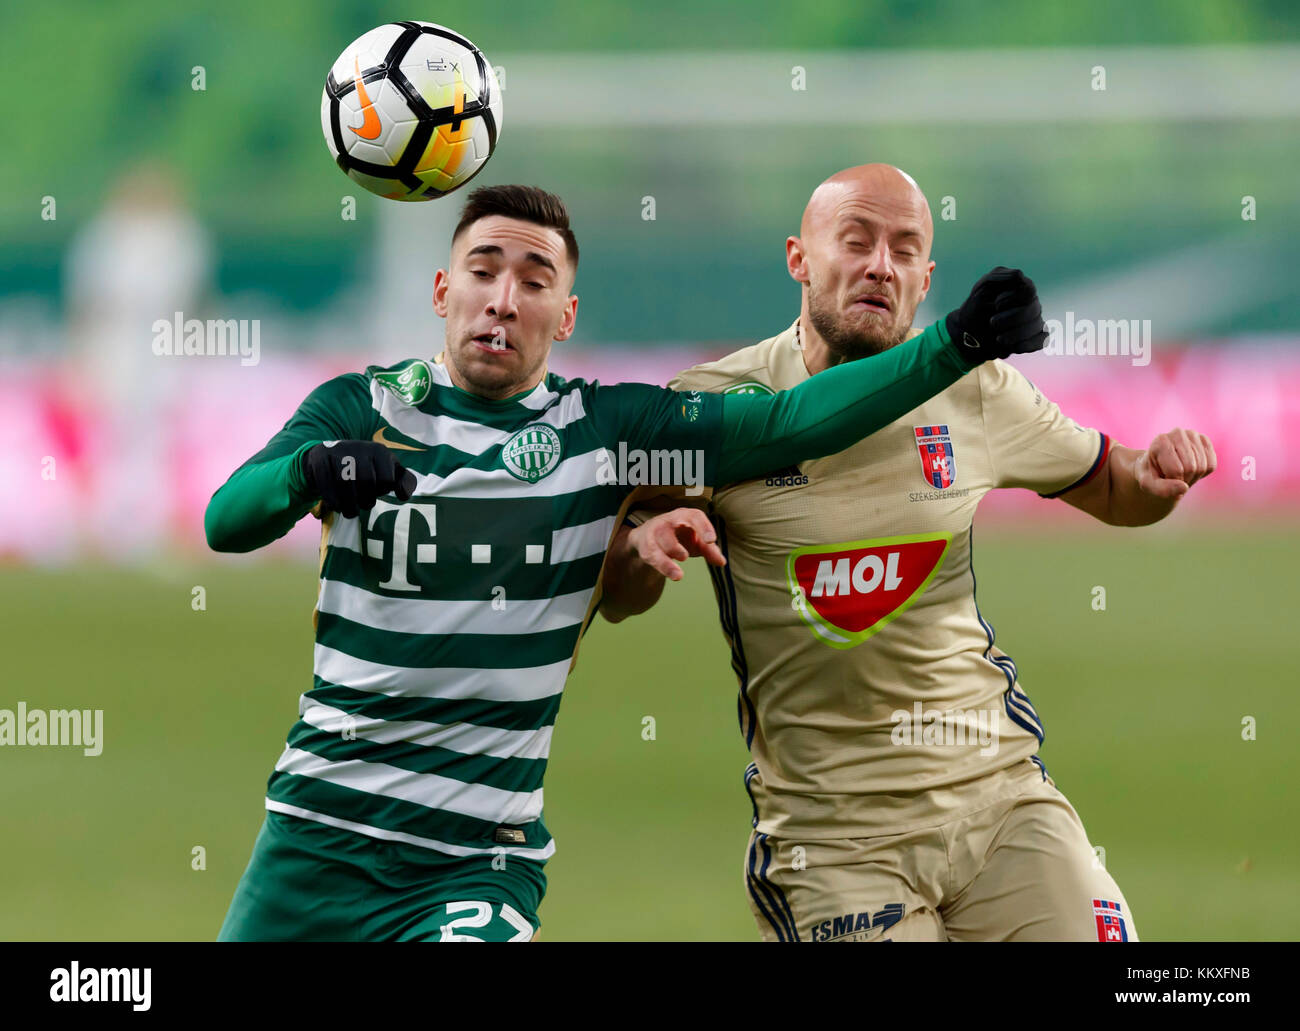 Budapest, Hungary. 2nd December, 2017. Fernando Gorriaran #27 of Ferencvarosi TC competes for the ball with Jozsef Varga (R) of Videoton FC during the Hungarian OTP Bank Liga match between Ferencvarosi TC and Videoton FC at Groupama Arena on December 2, 2017 in Budapest, Hungary. Credit: Laszlo Szirtesi/Alamy Live News Stock Photo